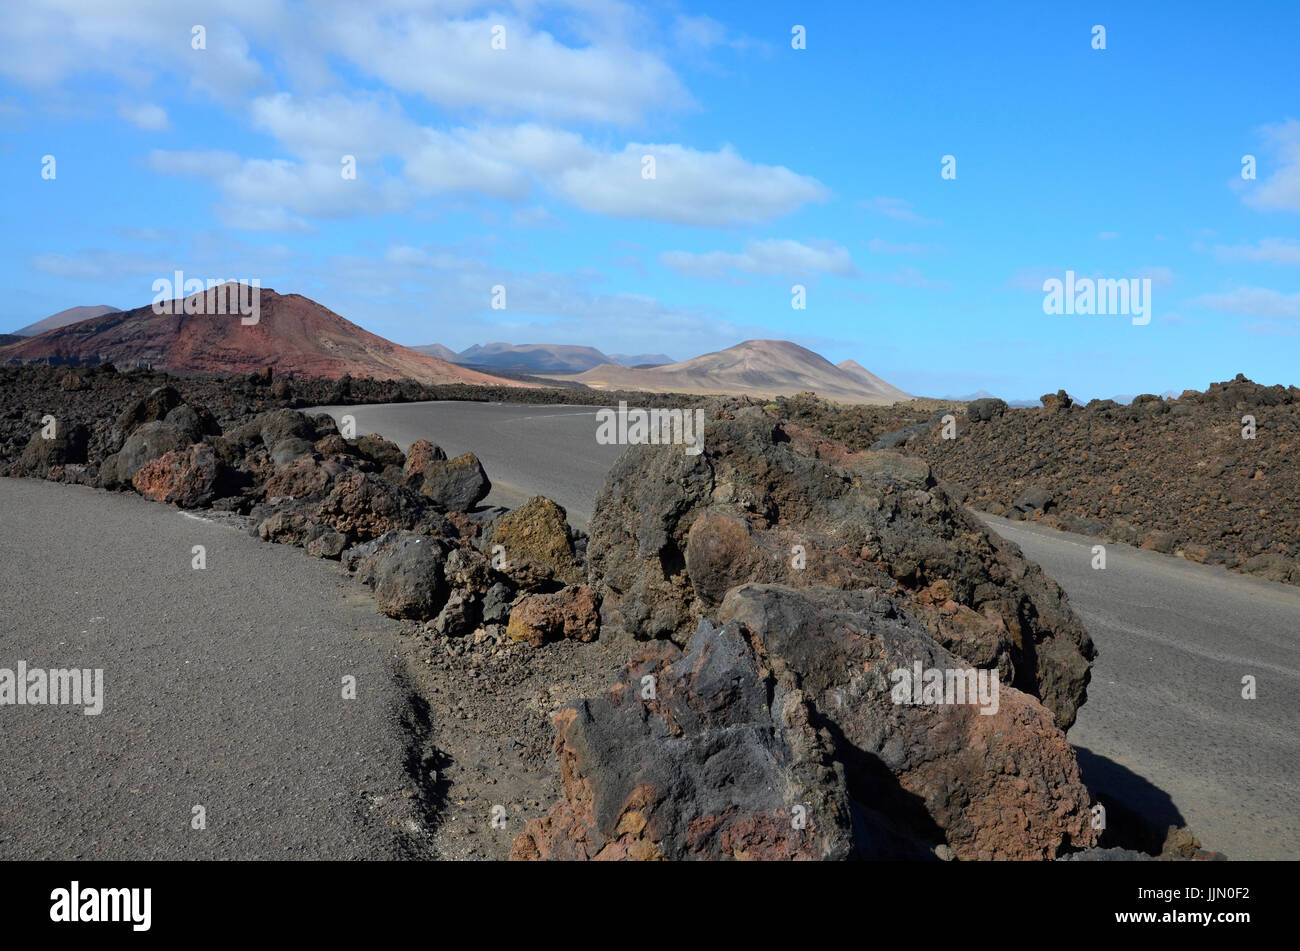 A road with a view to volcanic mountains in Timanfaya National Park on Lanzarote, the Canary Islands, Spain Stock Photo